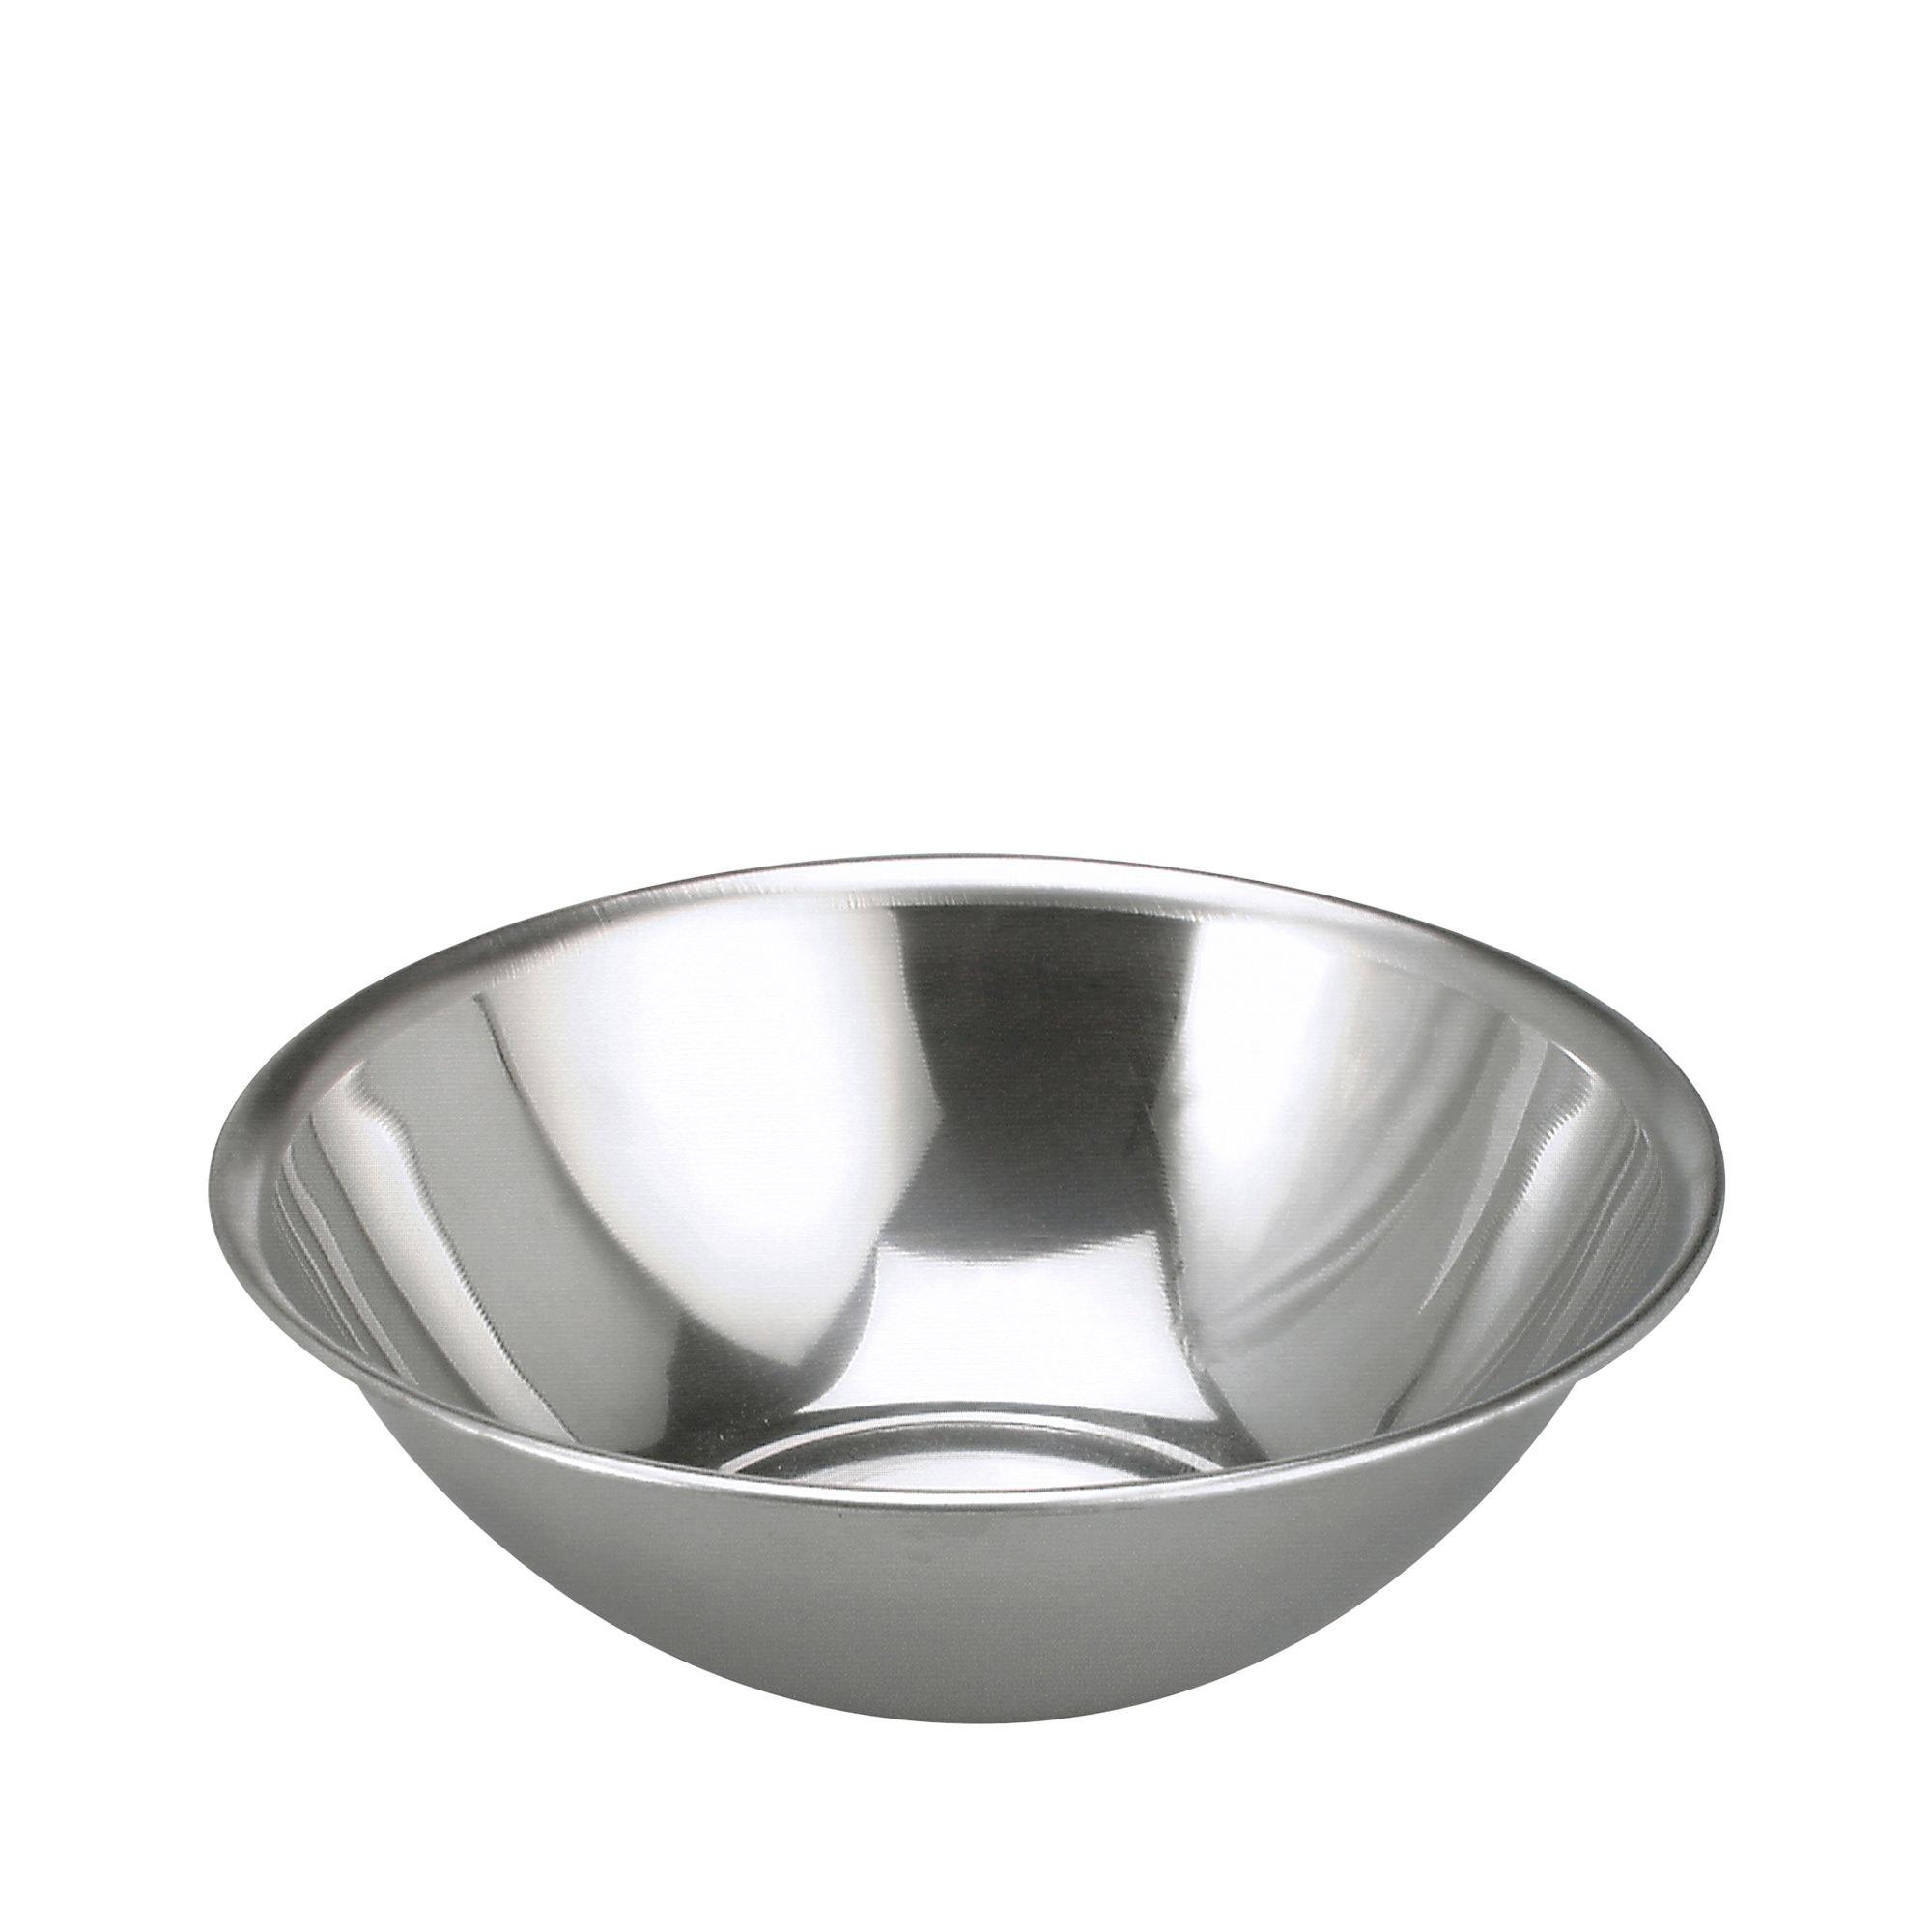 Chef Inox Stainless Steel Mixing Bowl 34.5cm - 6.5L Image 1